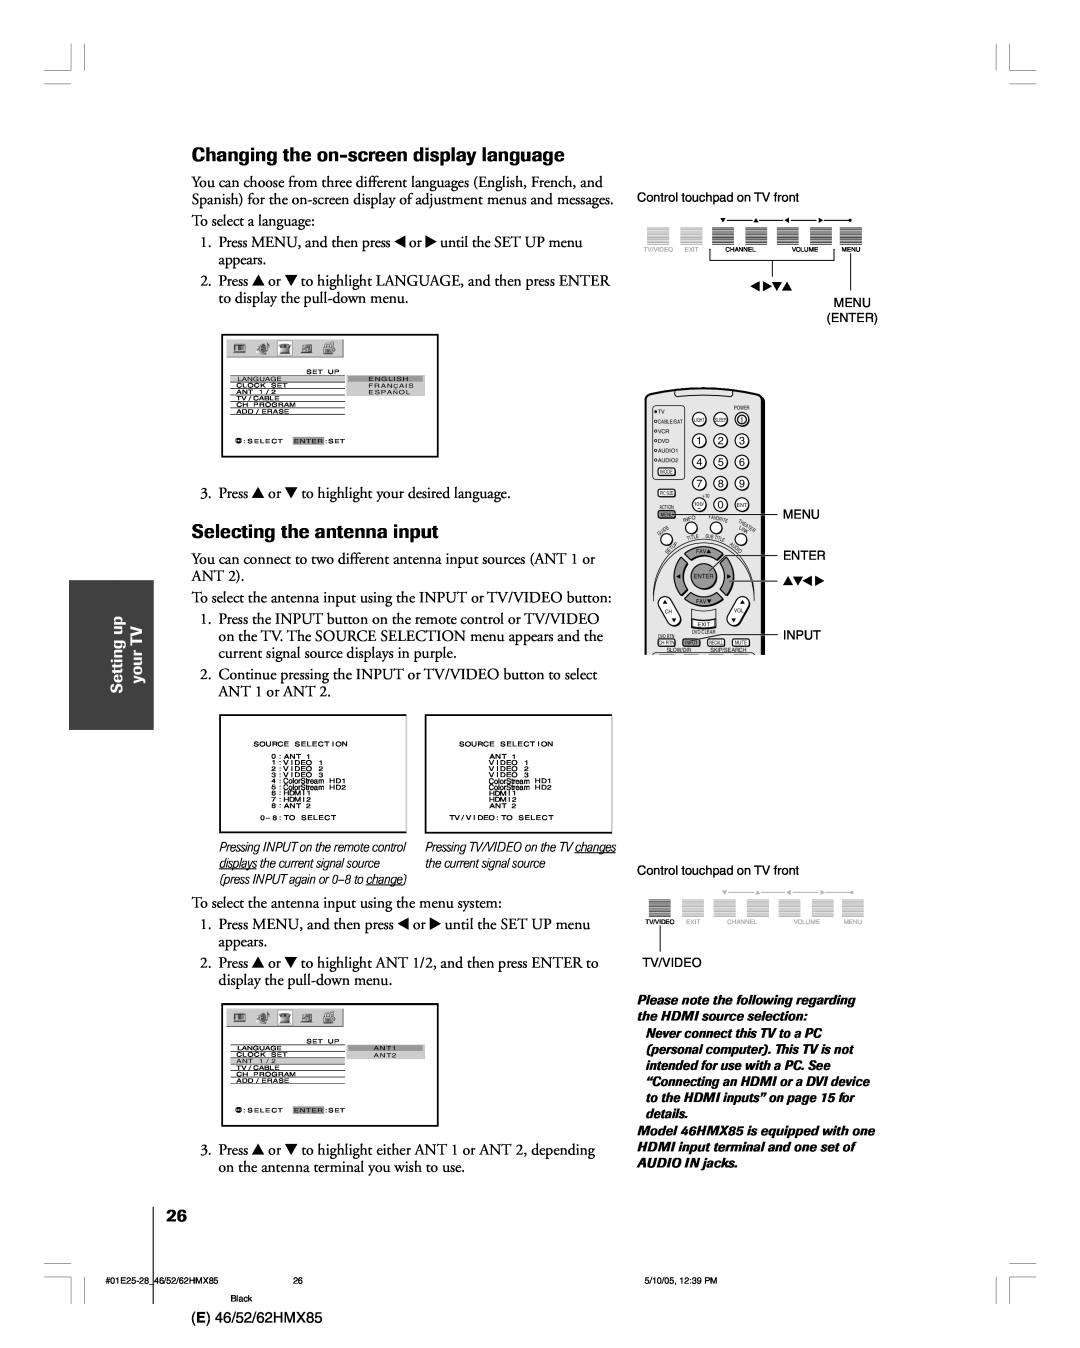 Toshiba 46HMX85, 62HMX85, 52HMX85 owner manual Changing the on-screen display language, Selecting the antenna input 